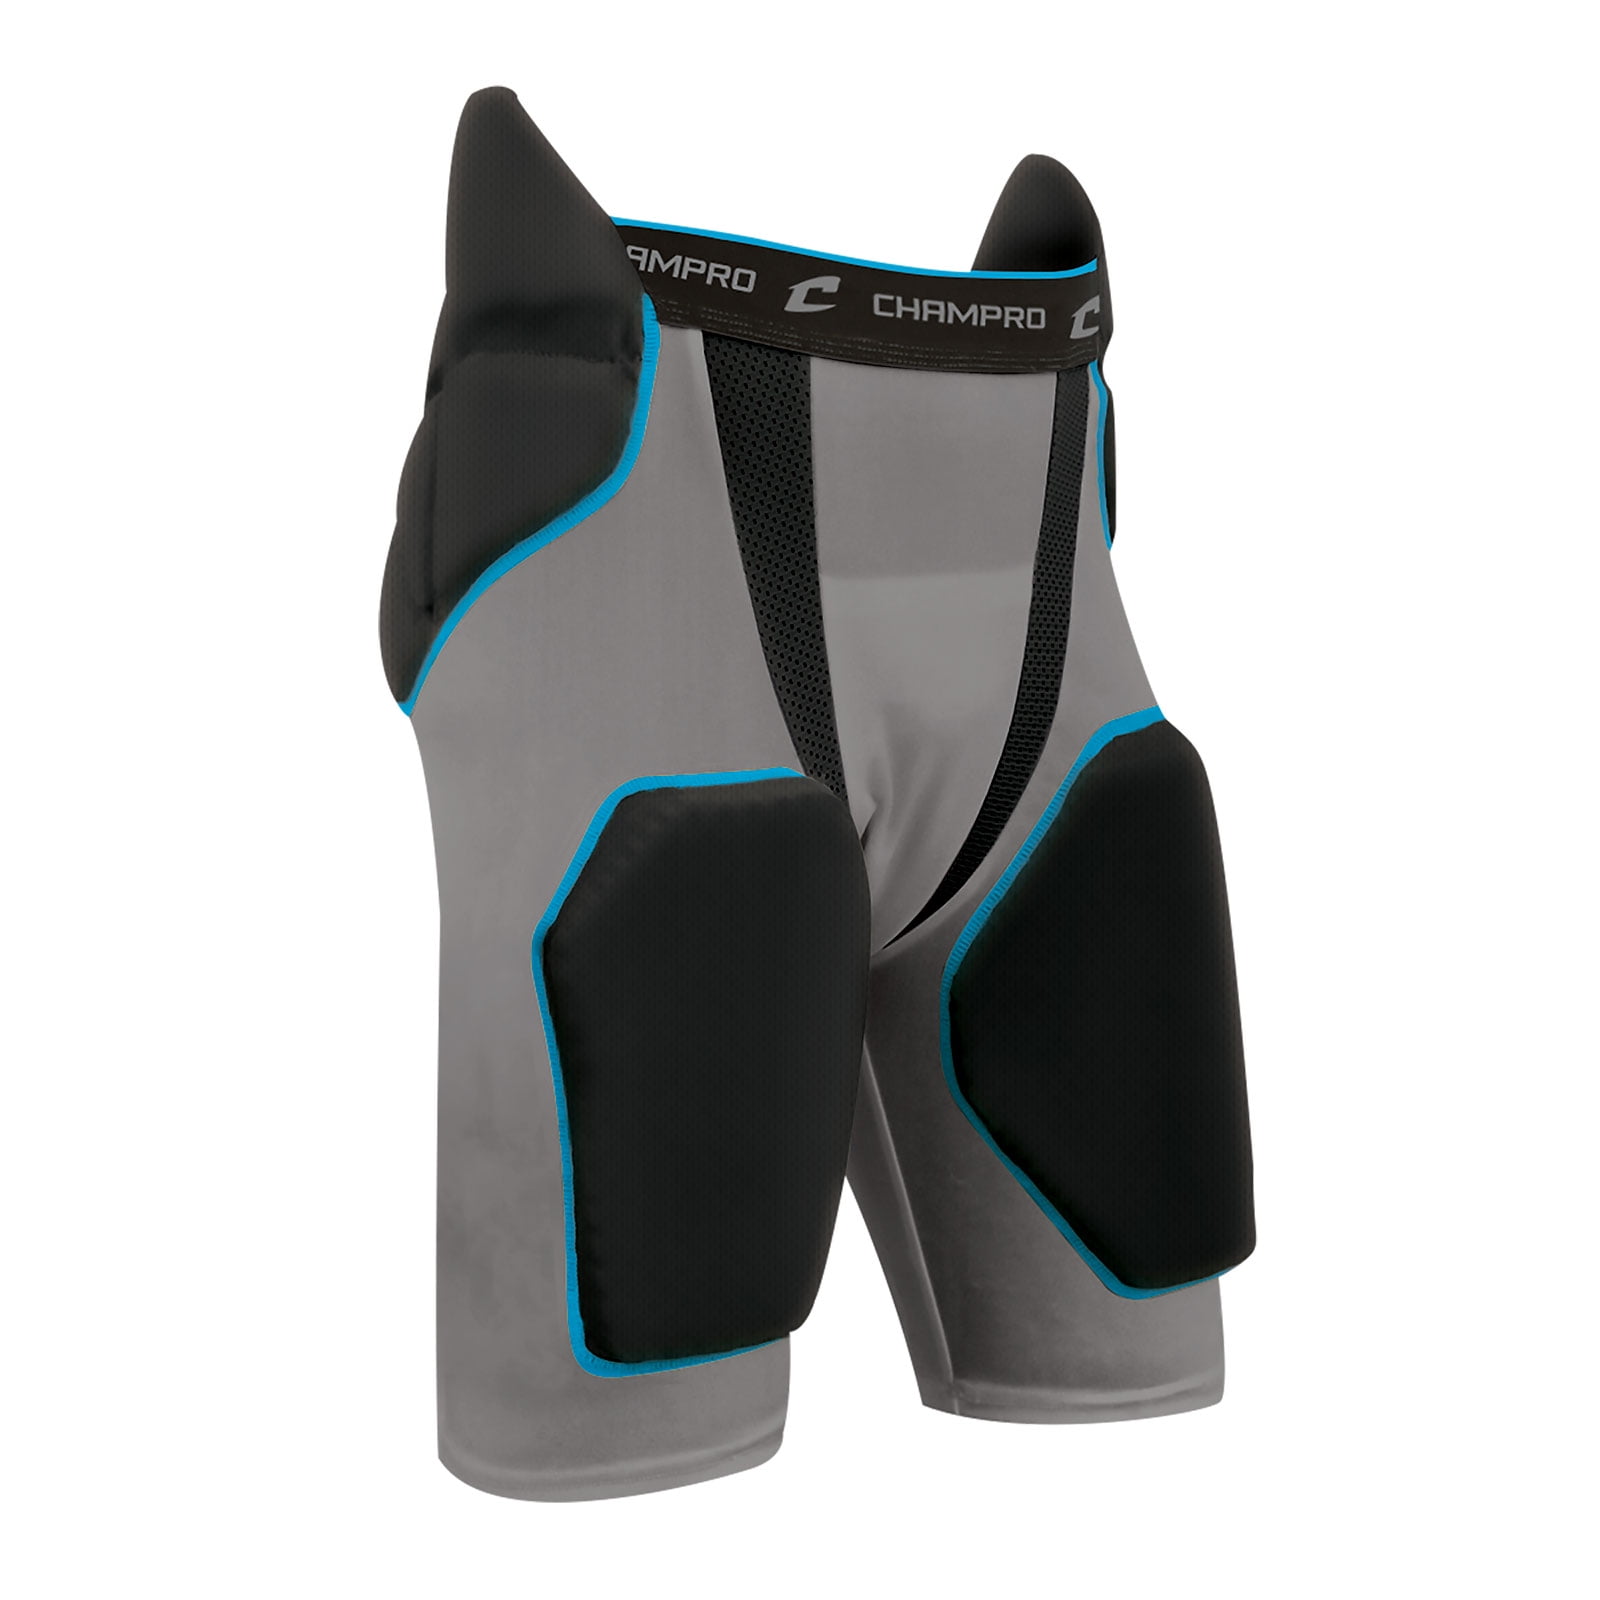 Champro Men's Formation 5-Pad Integrated Girdle 